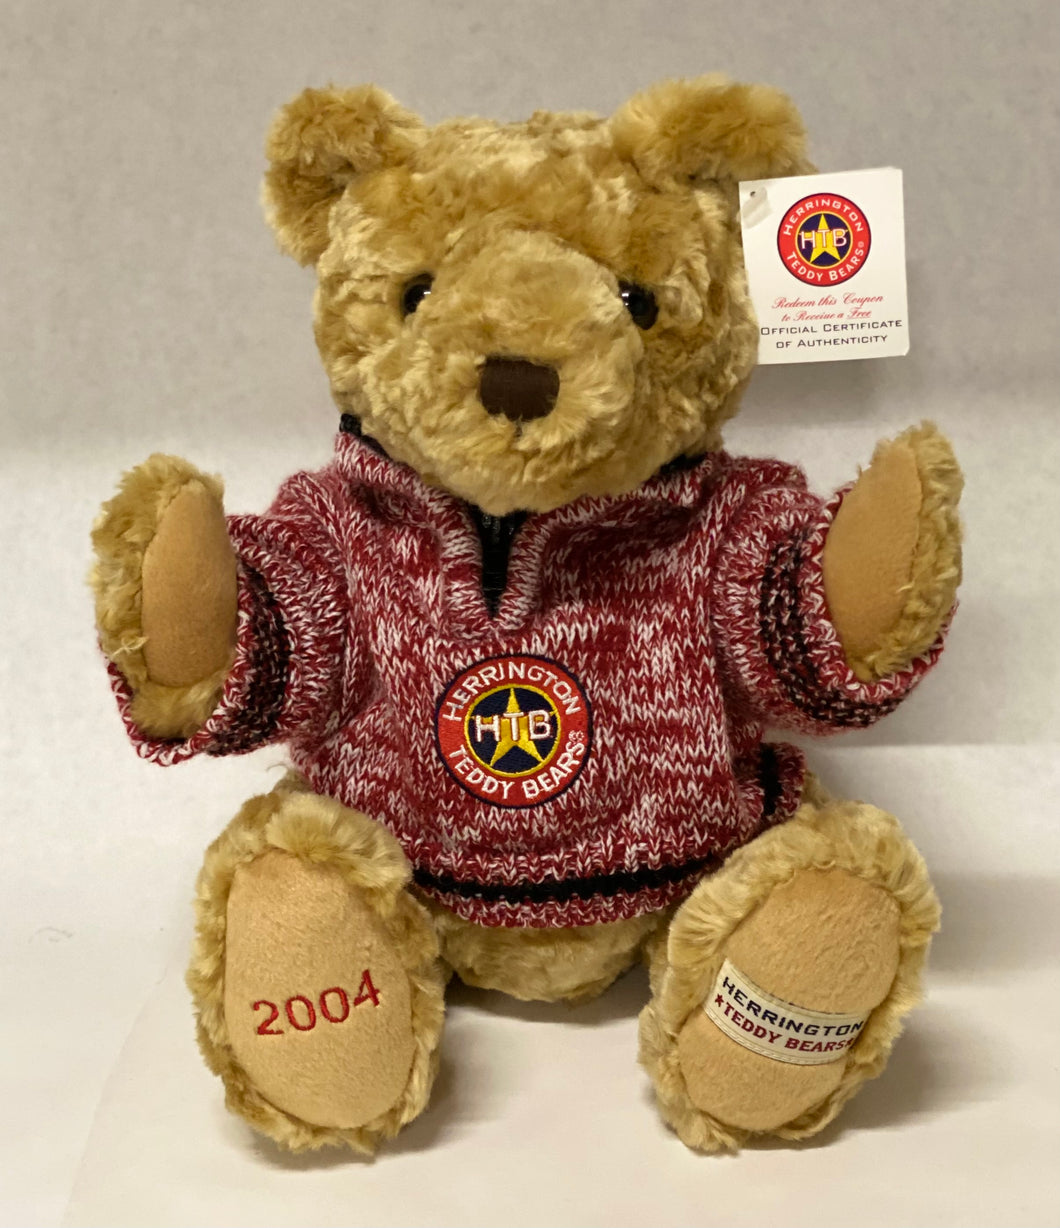 2004 HTB Holiday Teddy Bear-Treasures from the Archives